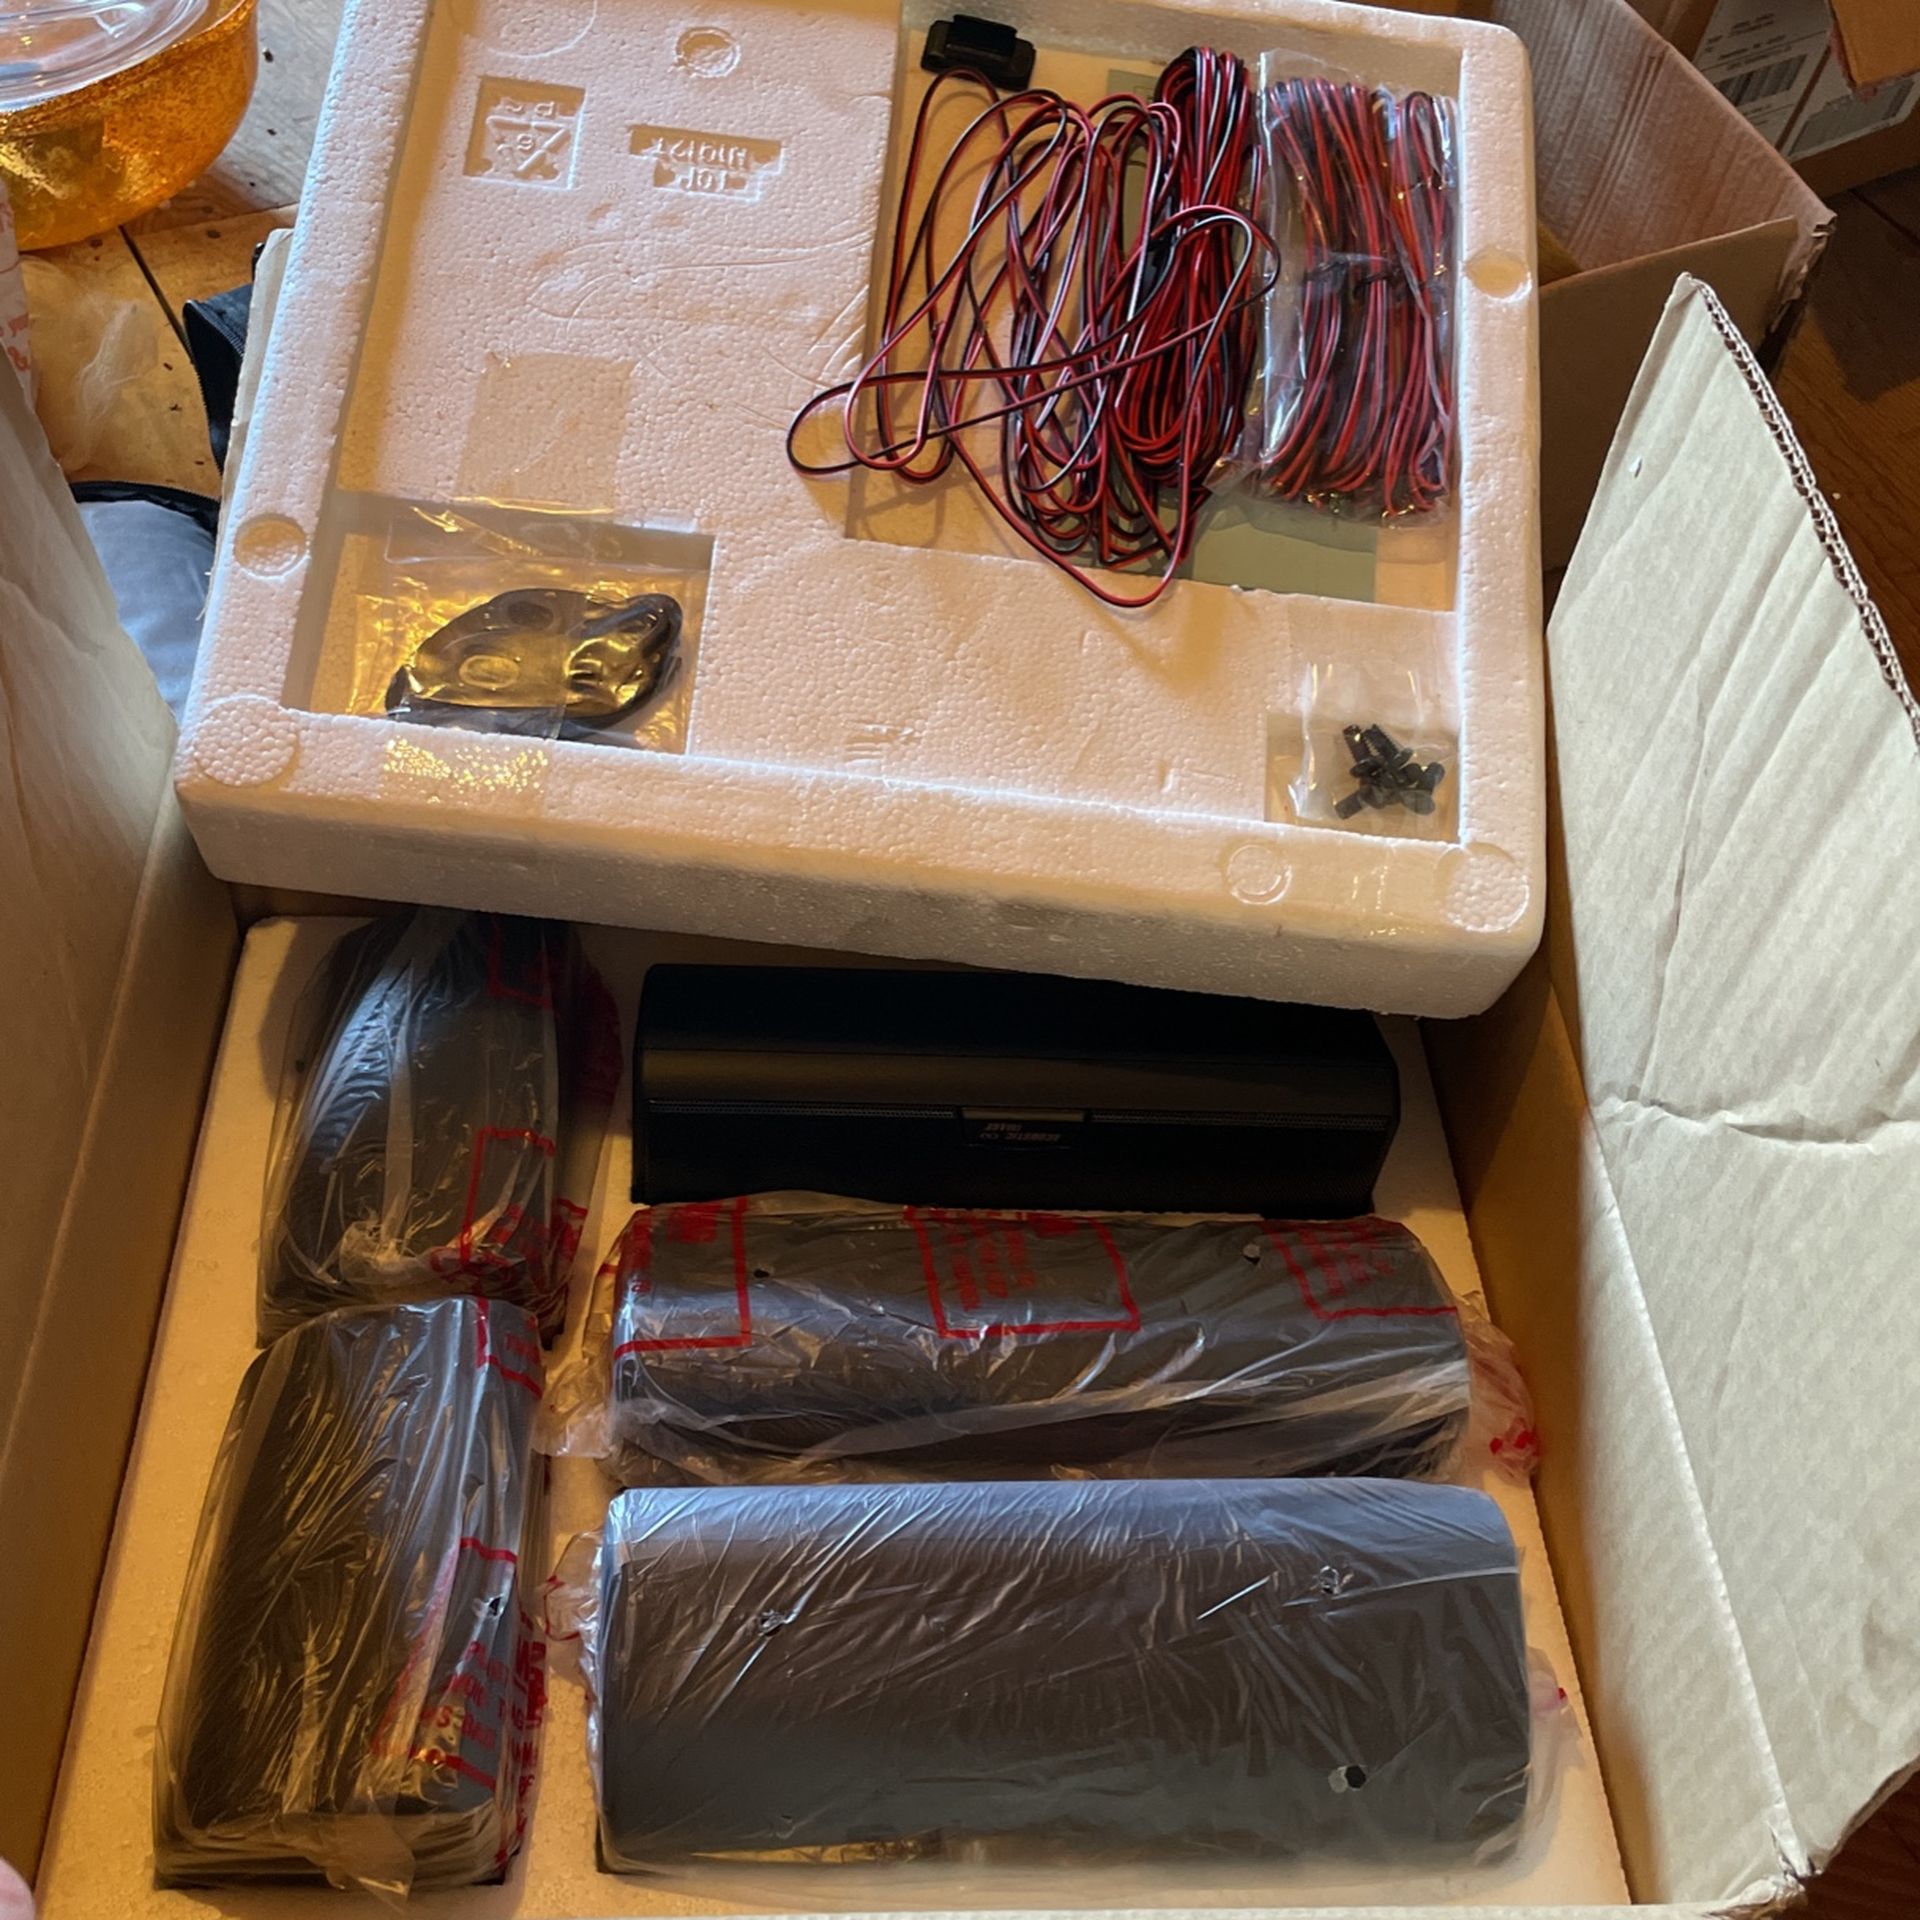 Home Theater Surround System /speakers New Open Box $30